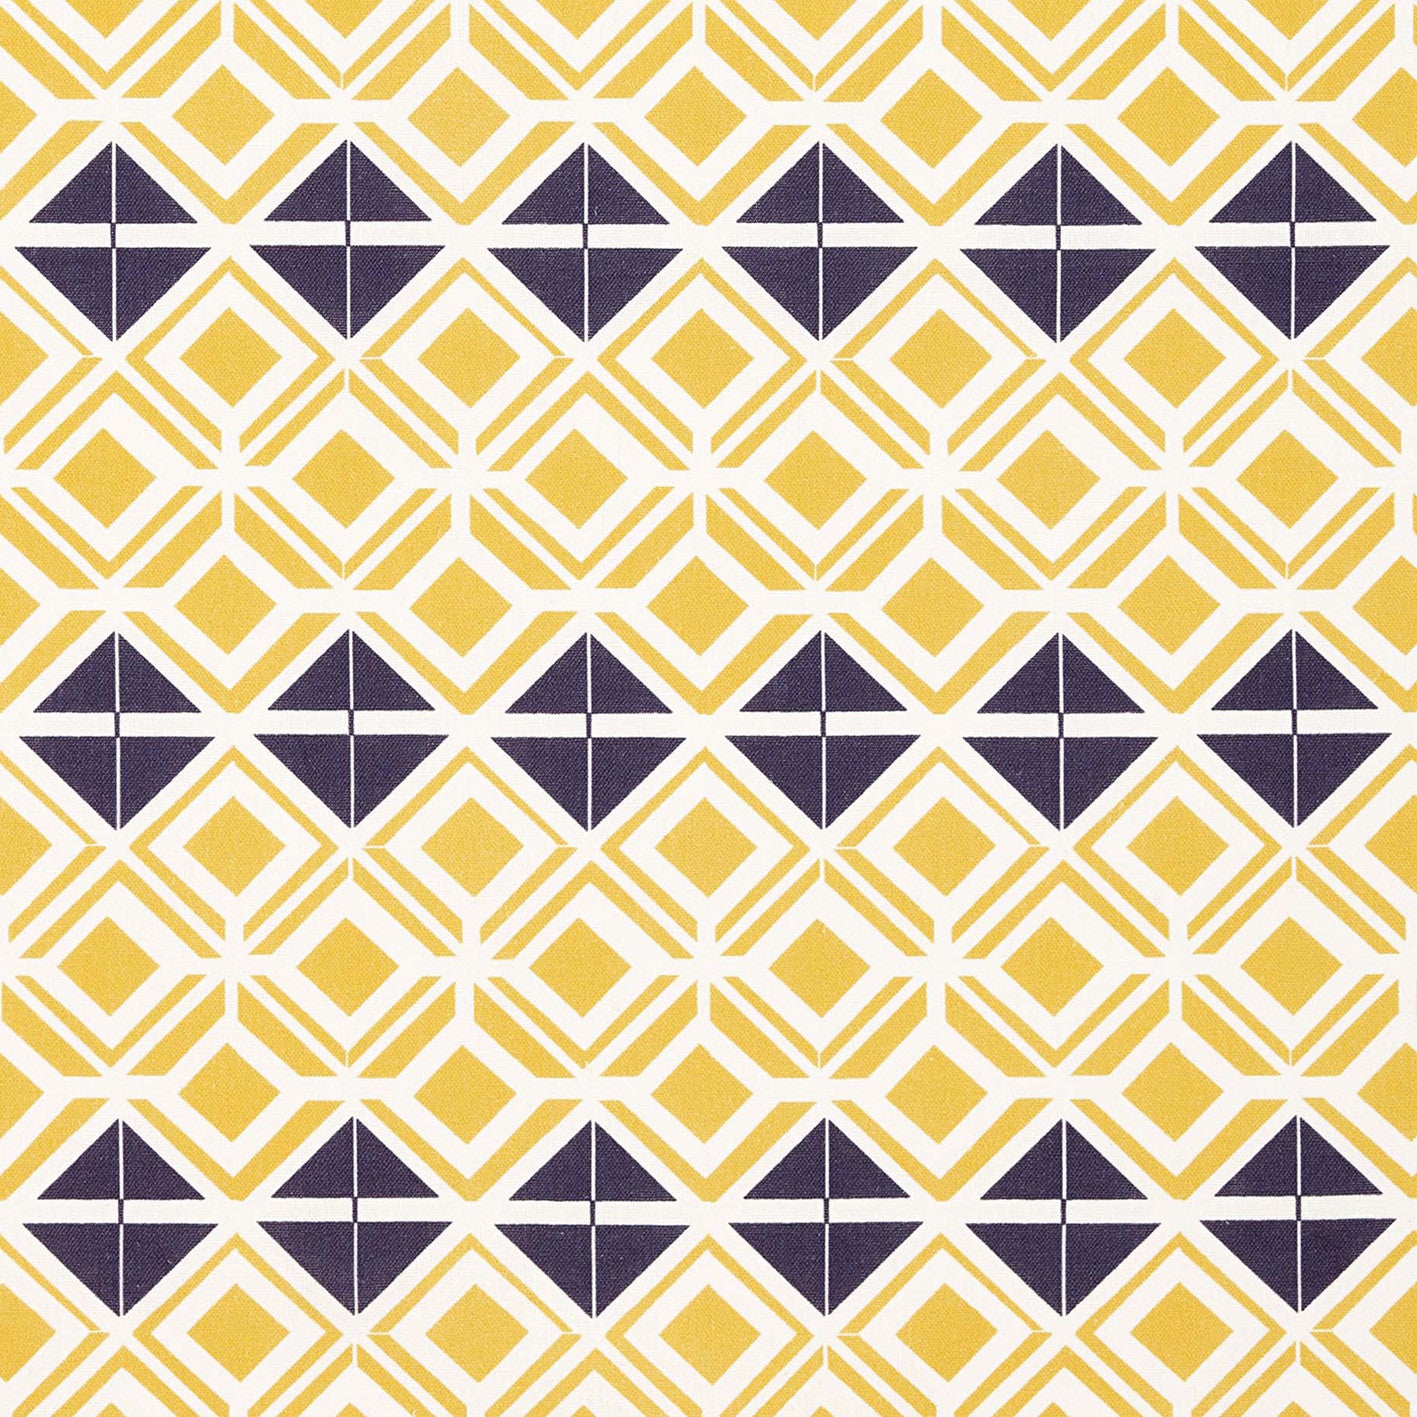 Glasswork Geometric Pattern Cotton Linen Fabric by the Meter in Maize Yellow & Aubergine Purple